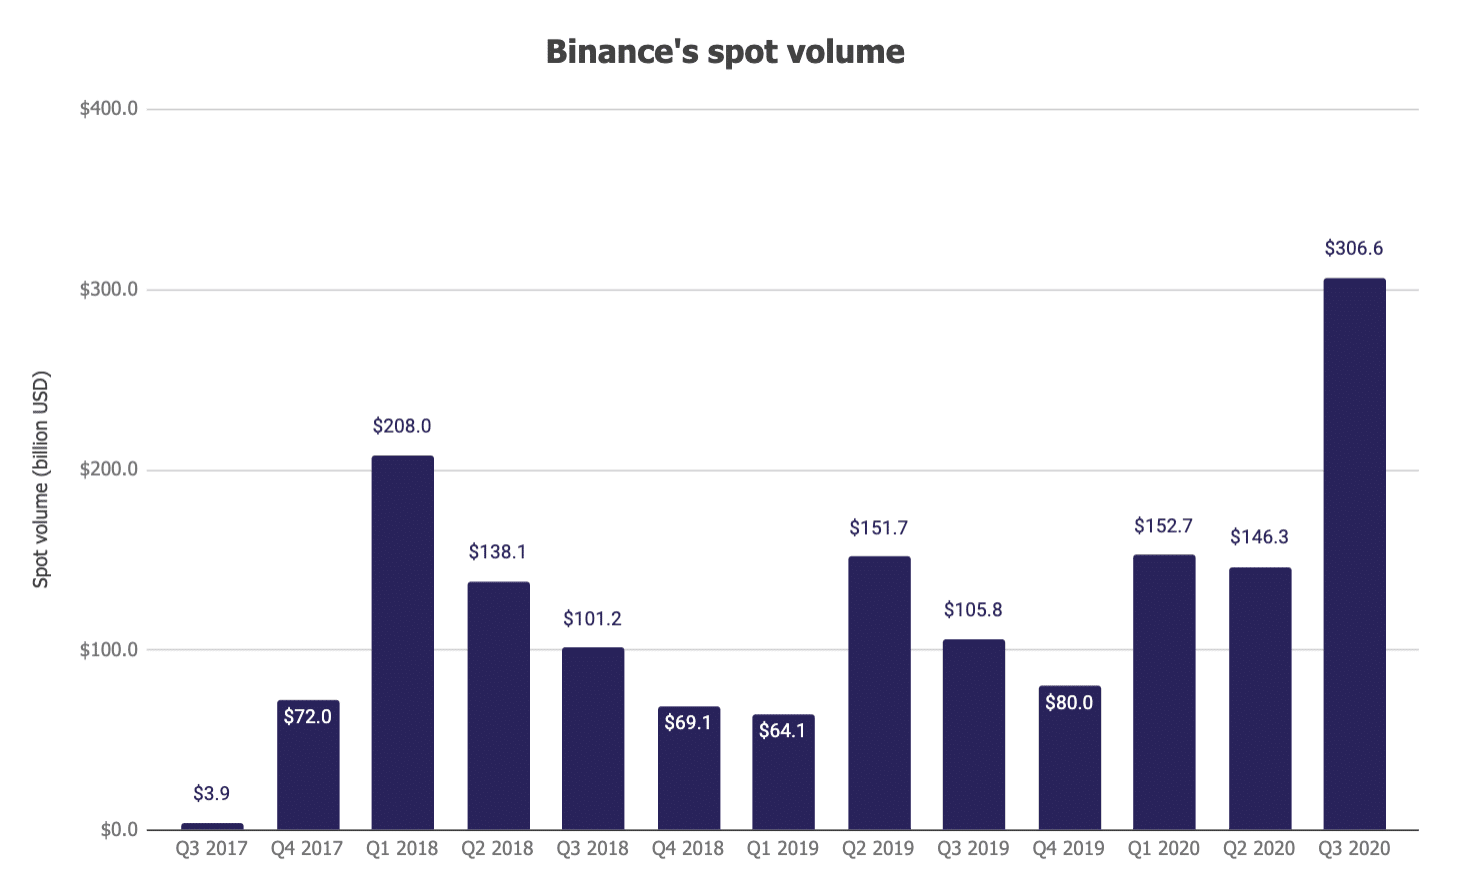 Binance Led in Market Share in as Volume on Centralized Exchanges Fell